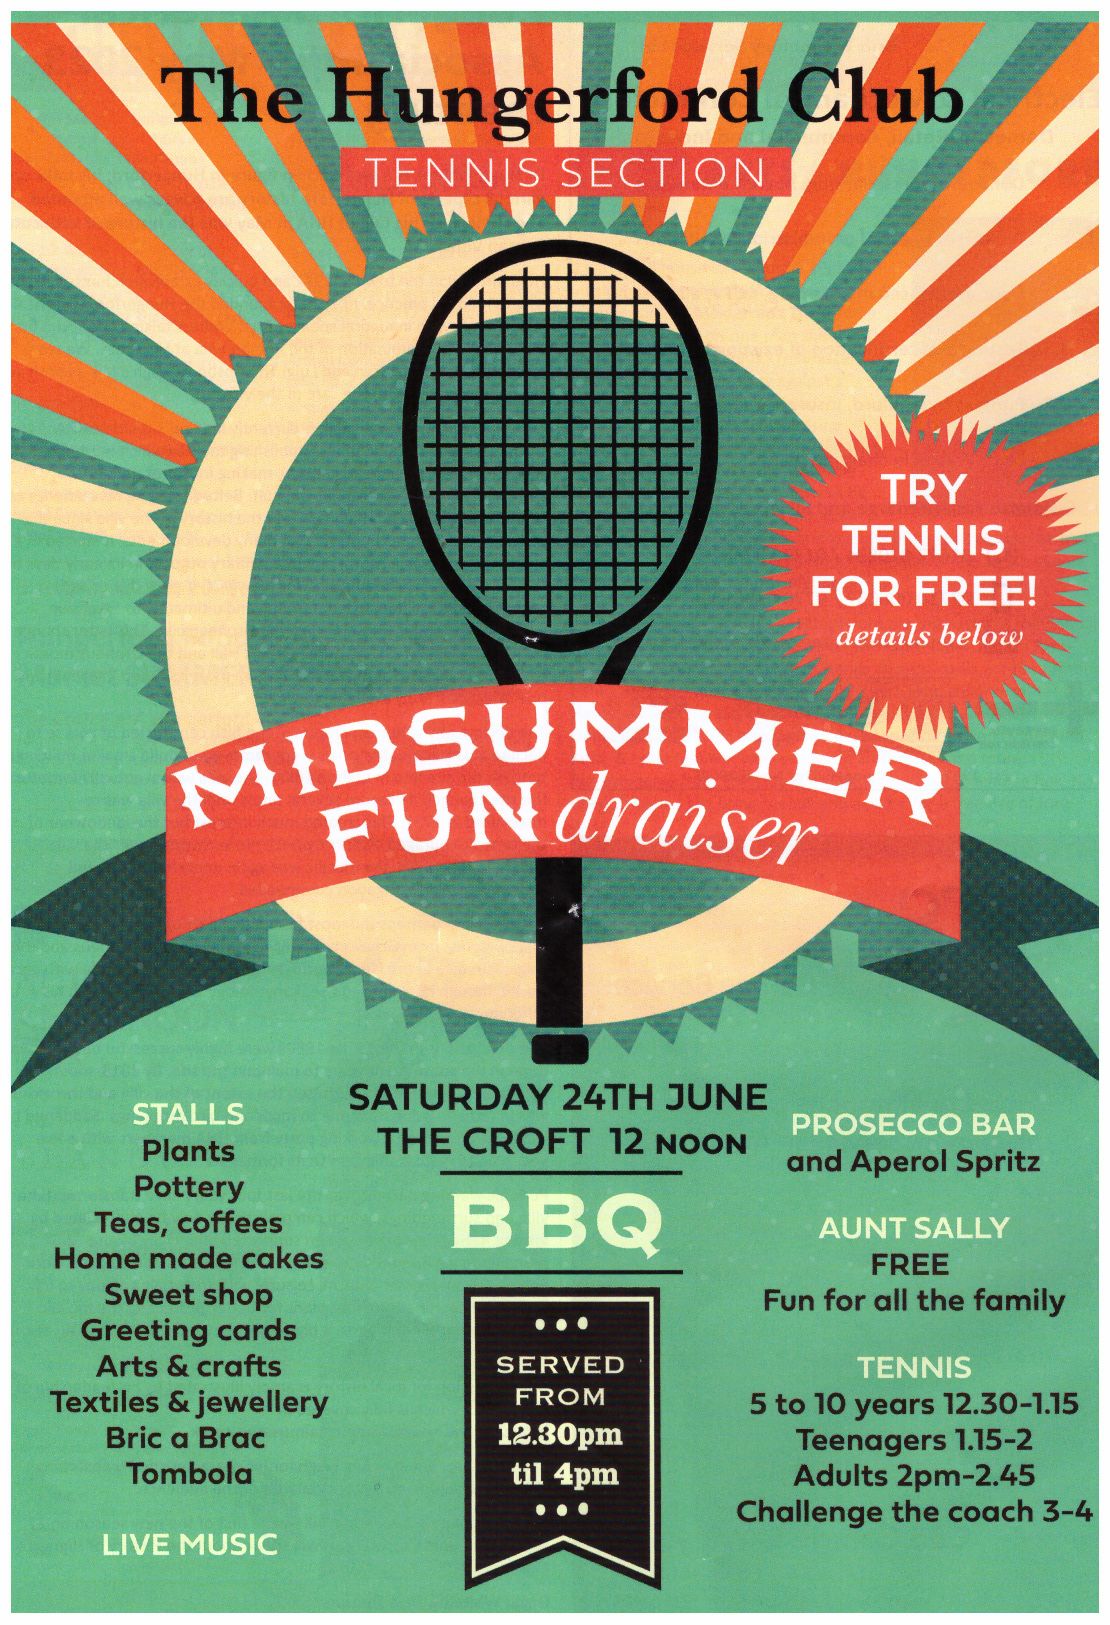 Hungerford Club - tennis funday and fundraising